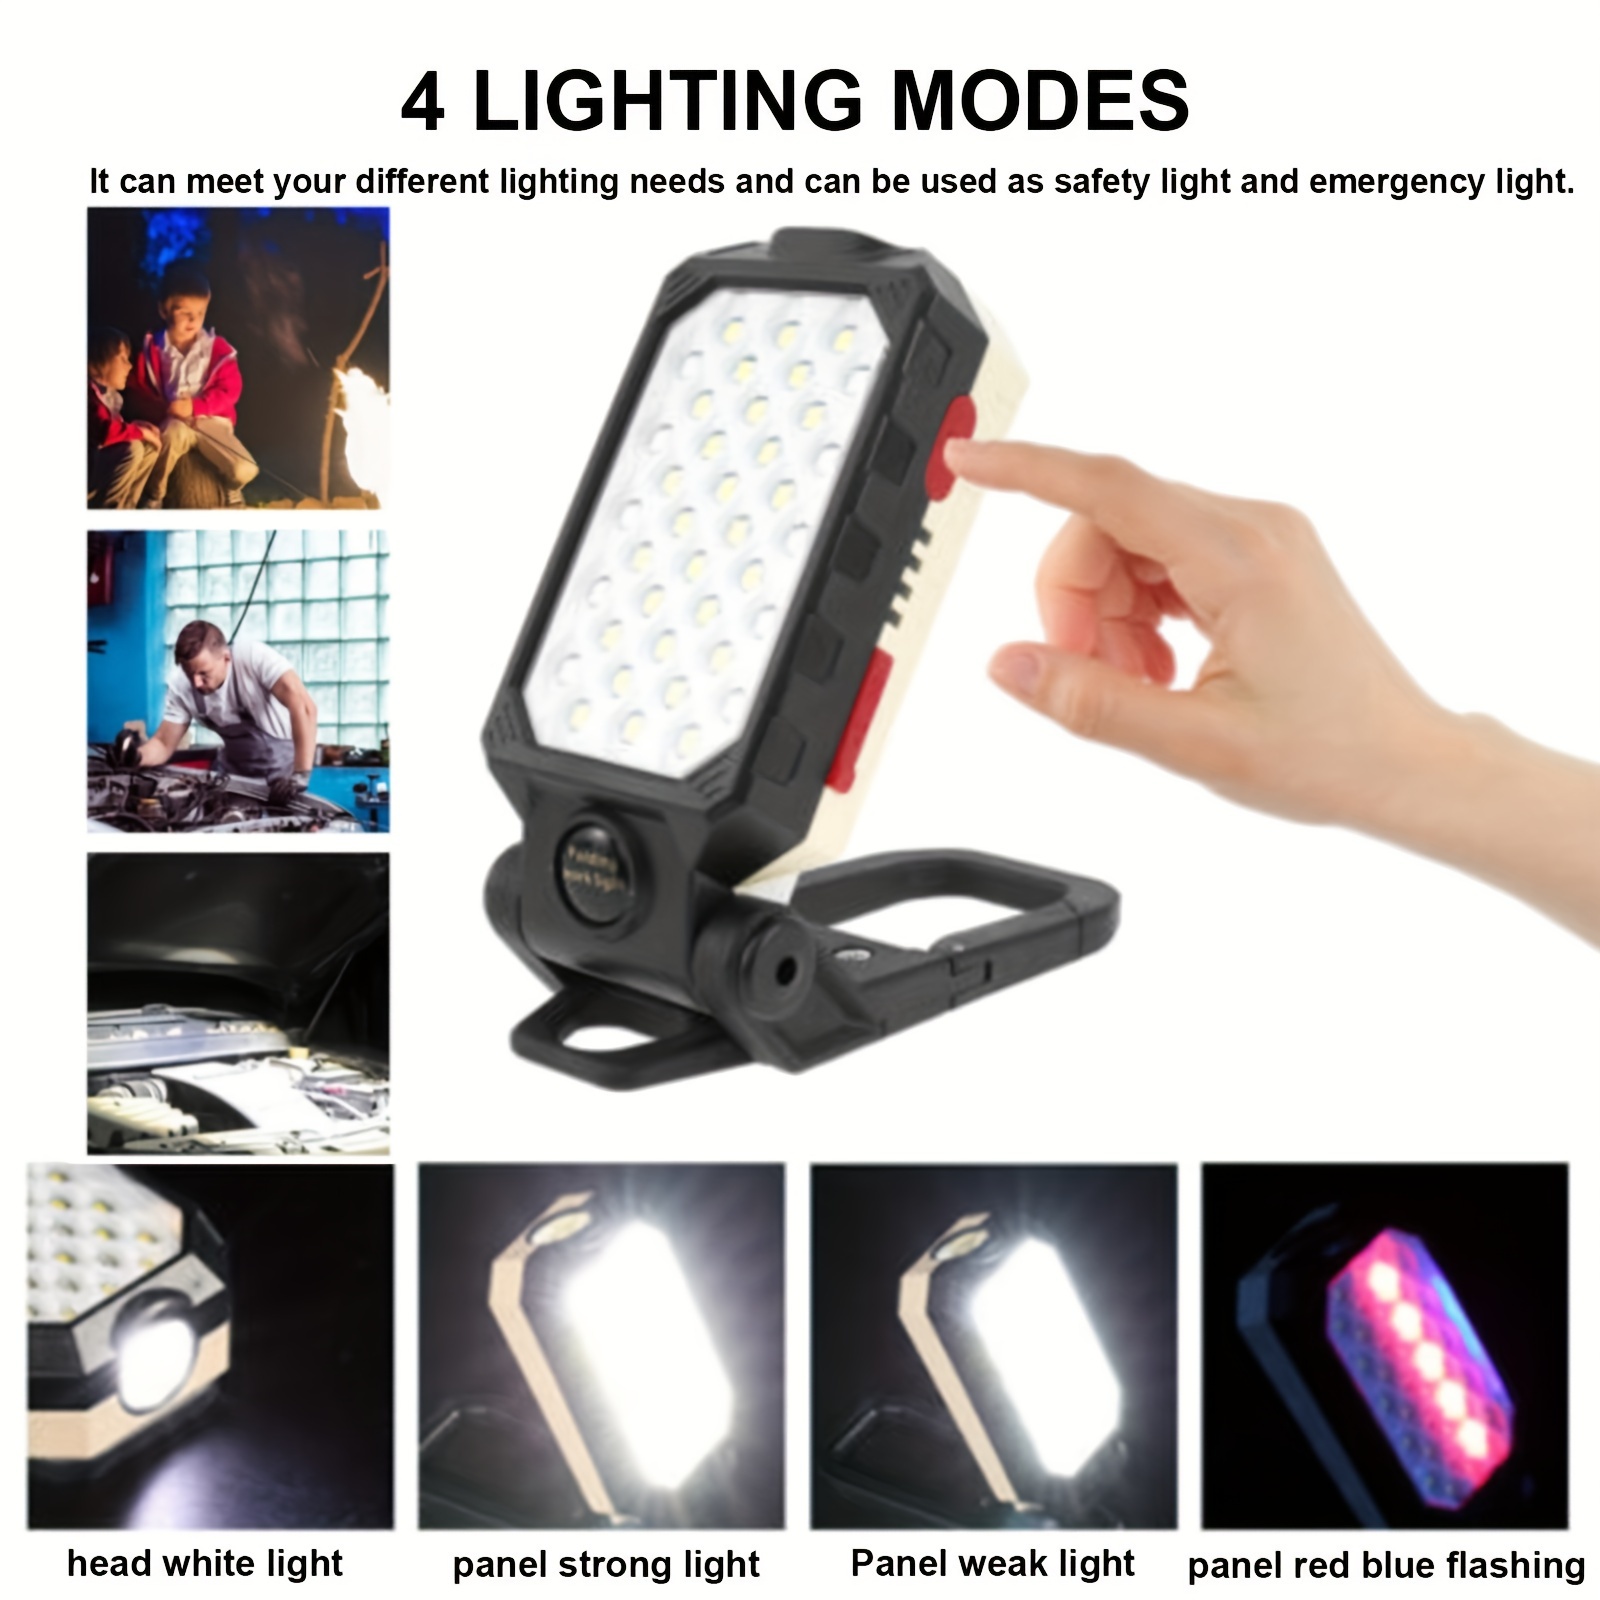 1pc Emergency Hand Electrical Repair Light, Work Light, 4 Lighting Modes,  Lamp Head 0-180 Degree Adjustable, Suitable For Home, Outdoor, Workshop, Car